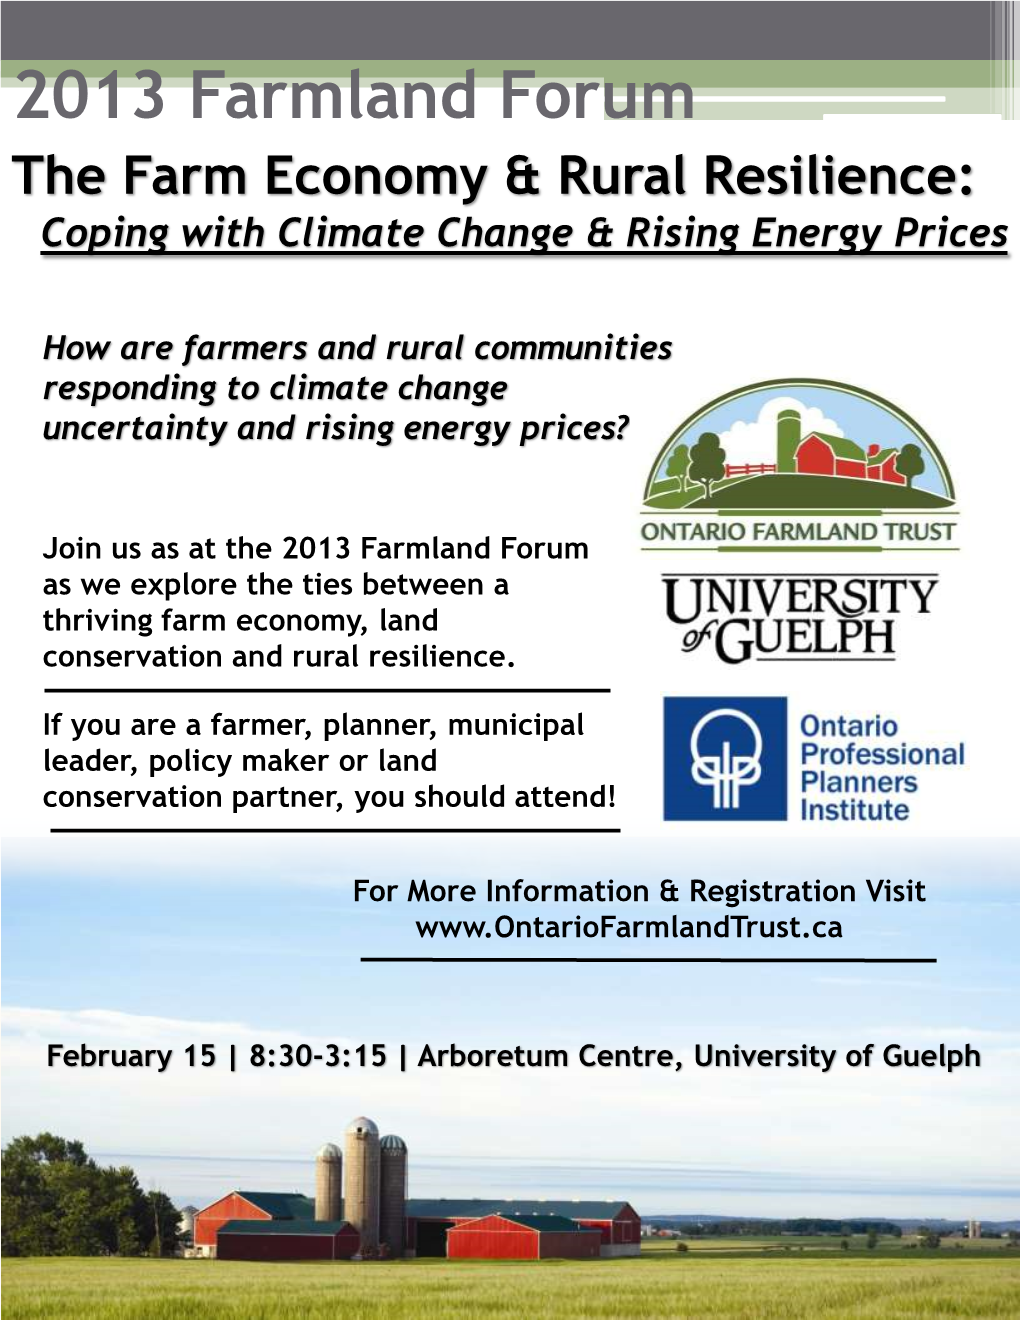 2013 Farmland Forum the Farm Economy & Rural Resilience: Coping with Climate Change & Rising Energy Prices